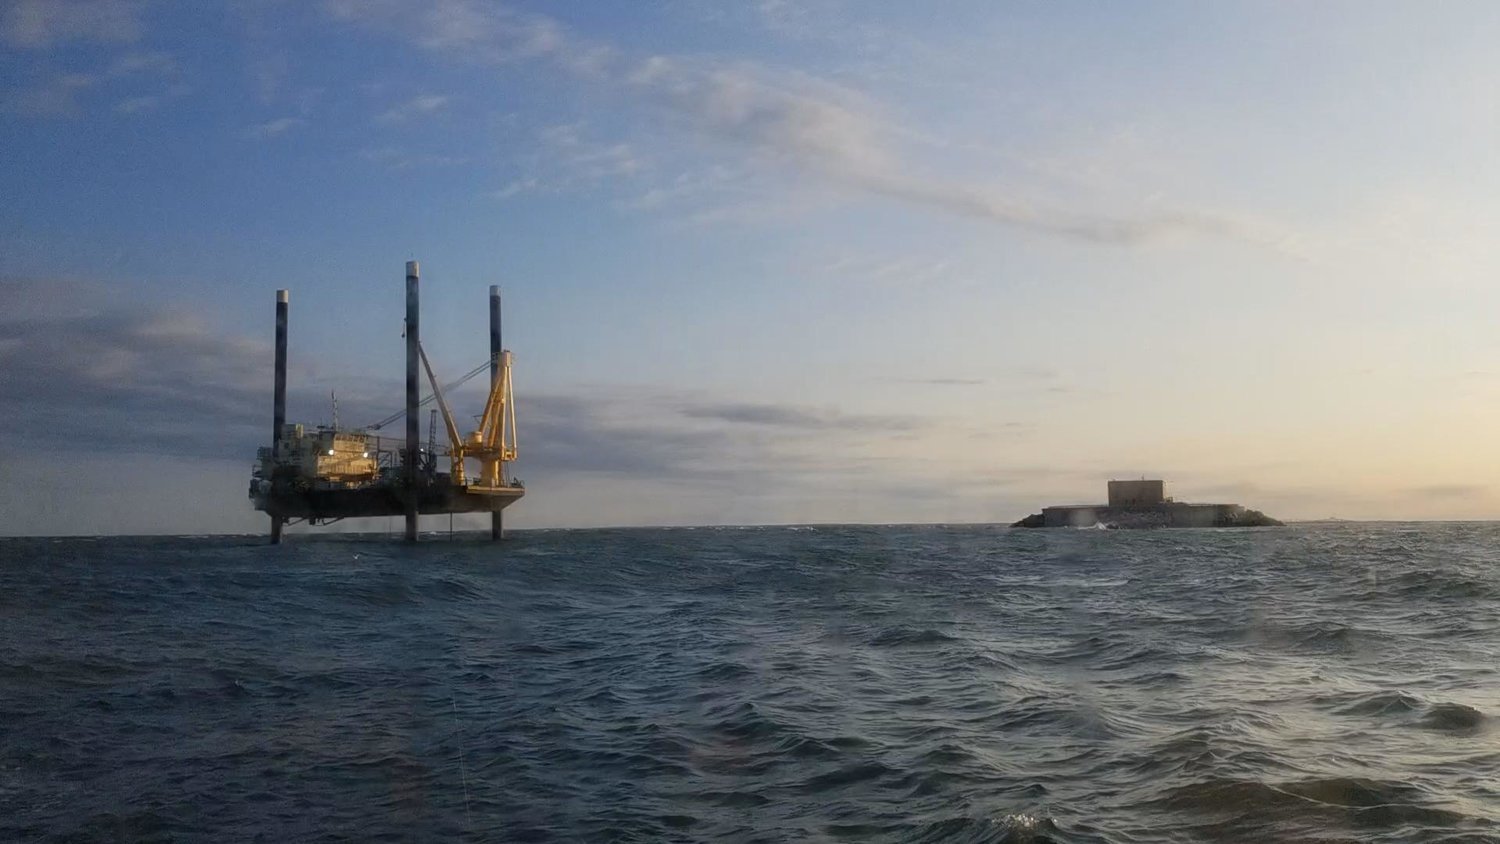 The offshore dredging has caused an apparent gas-like smell throughout the city.